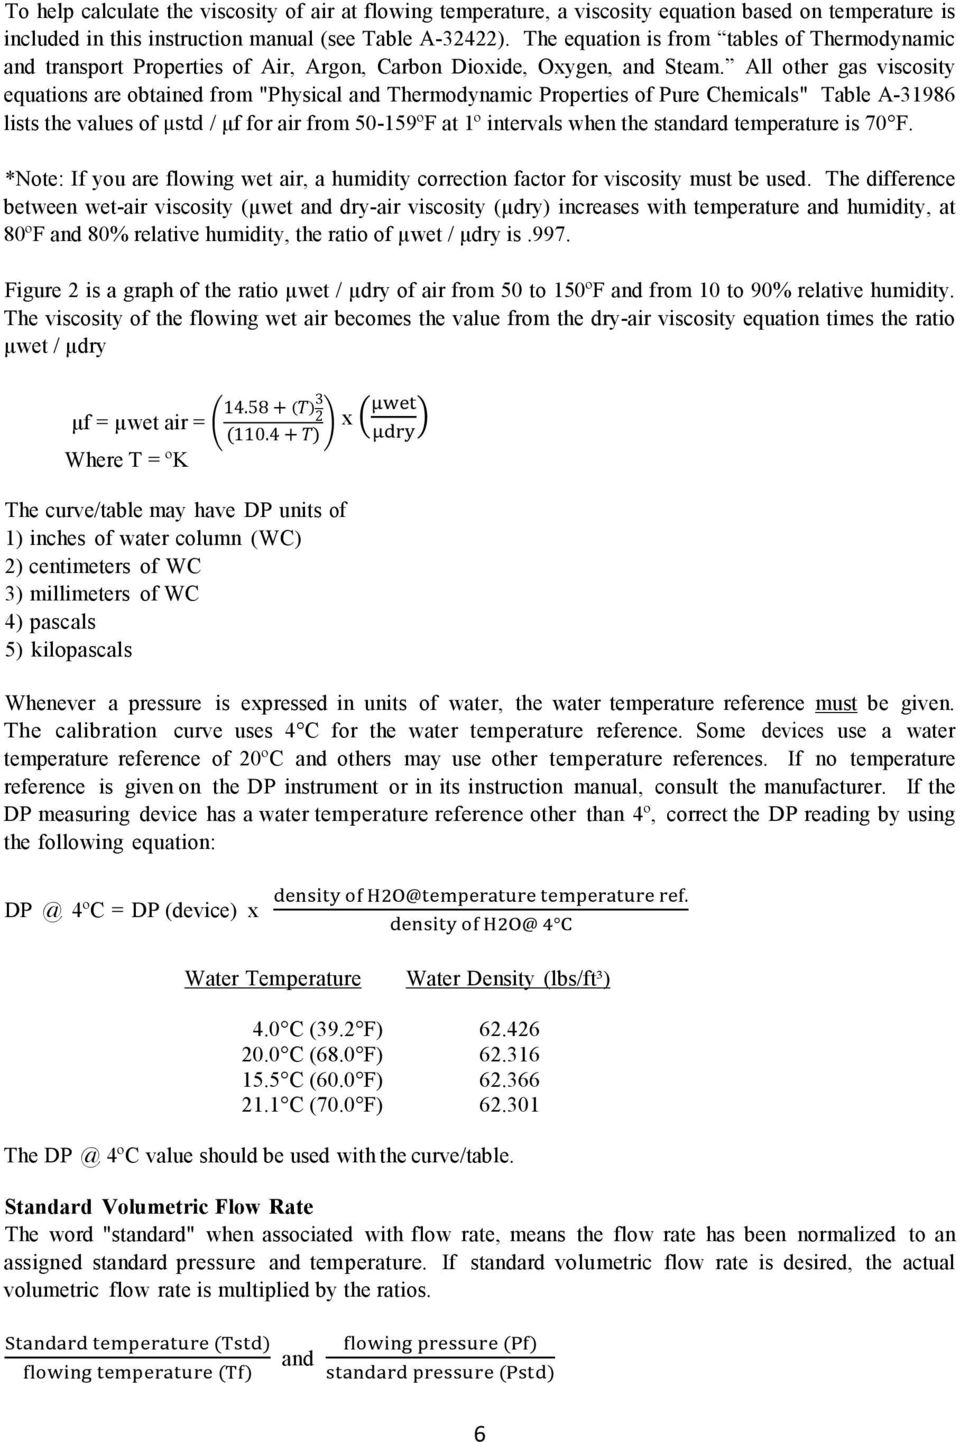 All other gas viscosity equations are obtained from "Physical and Thermodynamic Properties of Pure Chemicals" Table A-31986 lists the values of μstd / µf for air from 50-159ºF at 1º intervals when